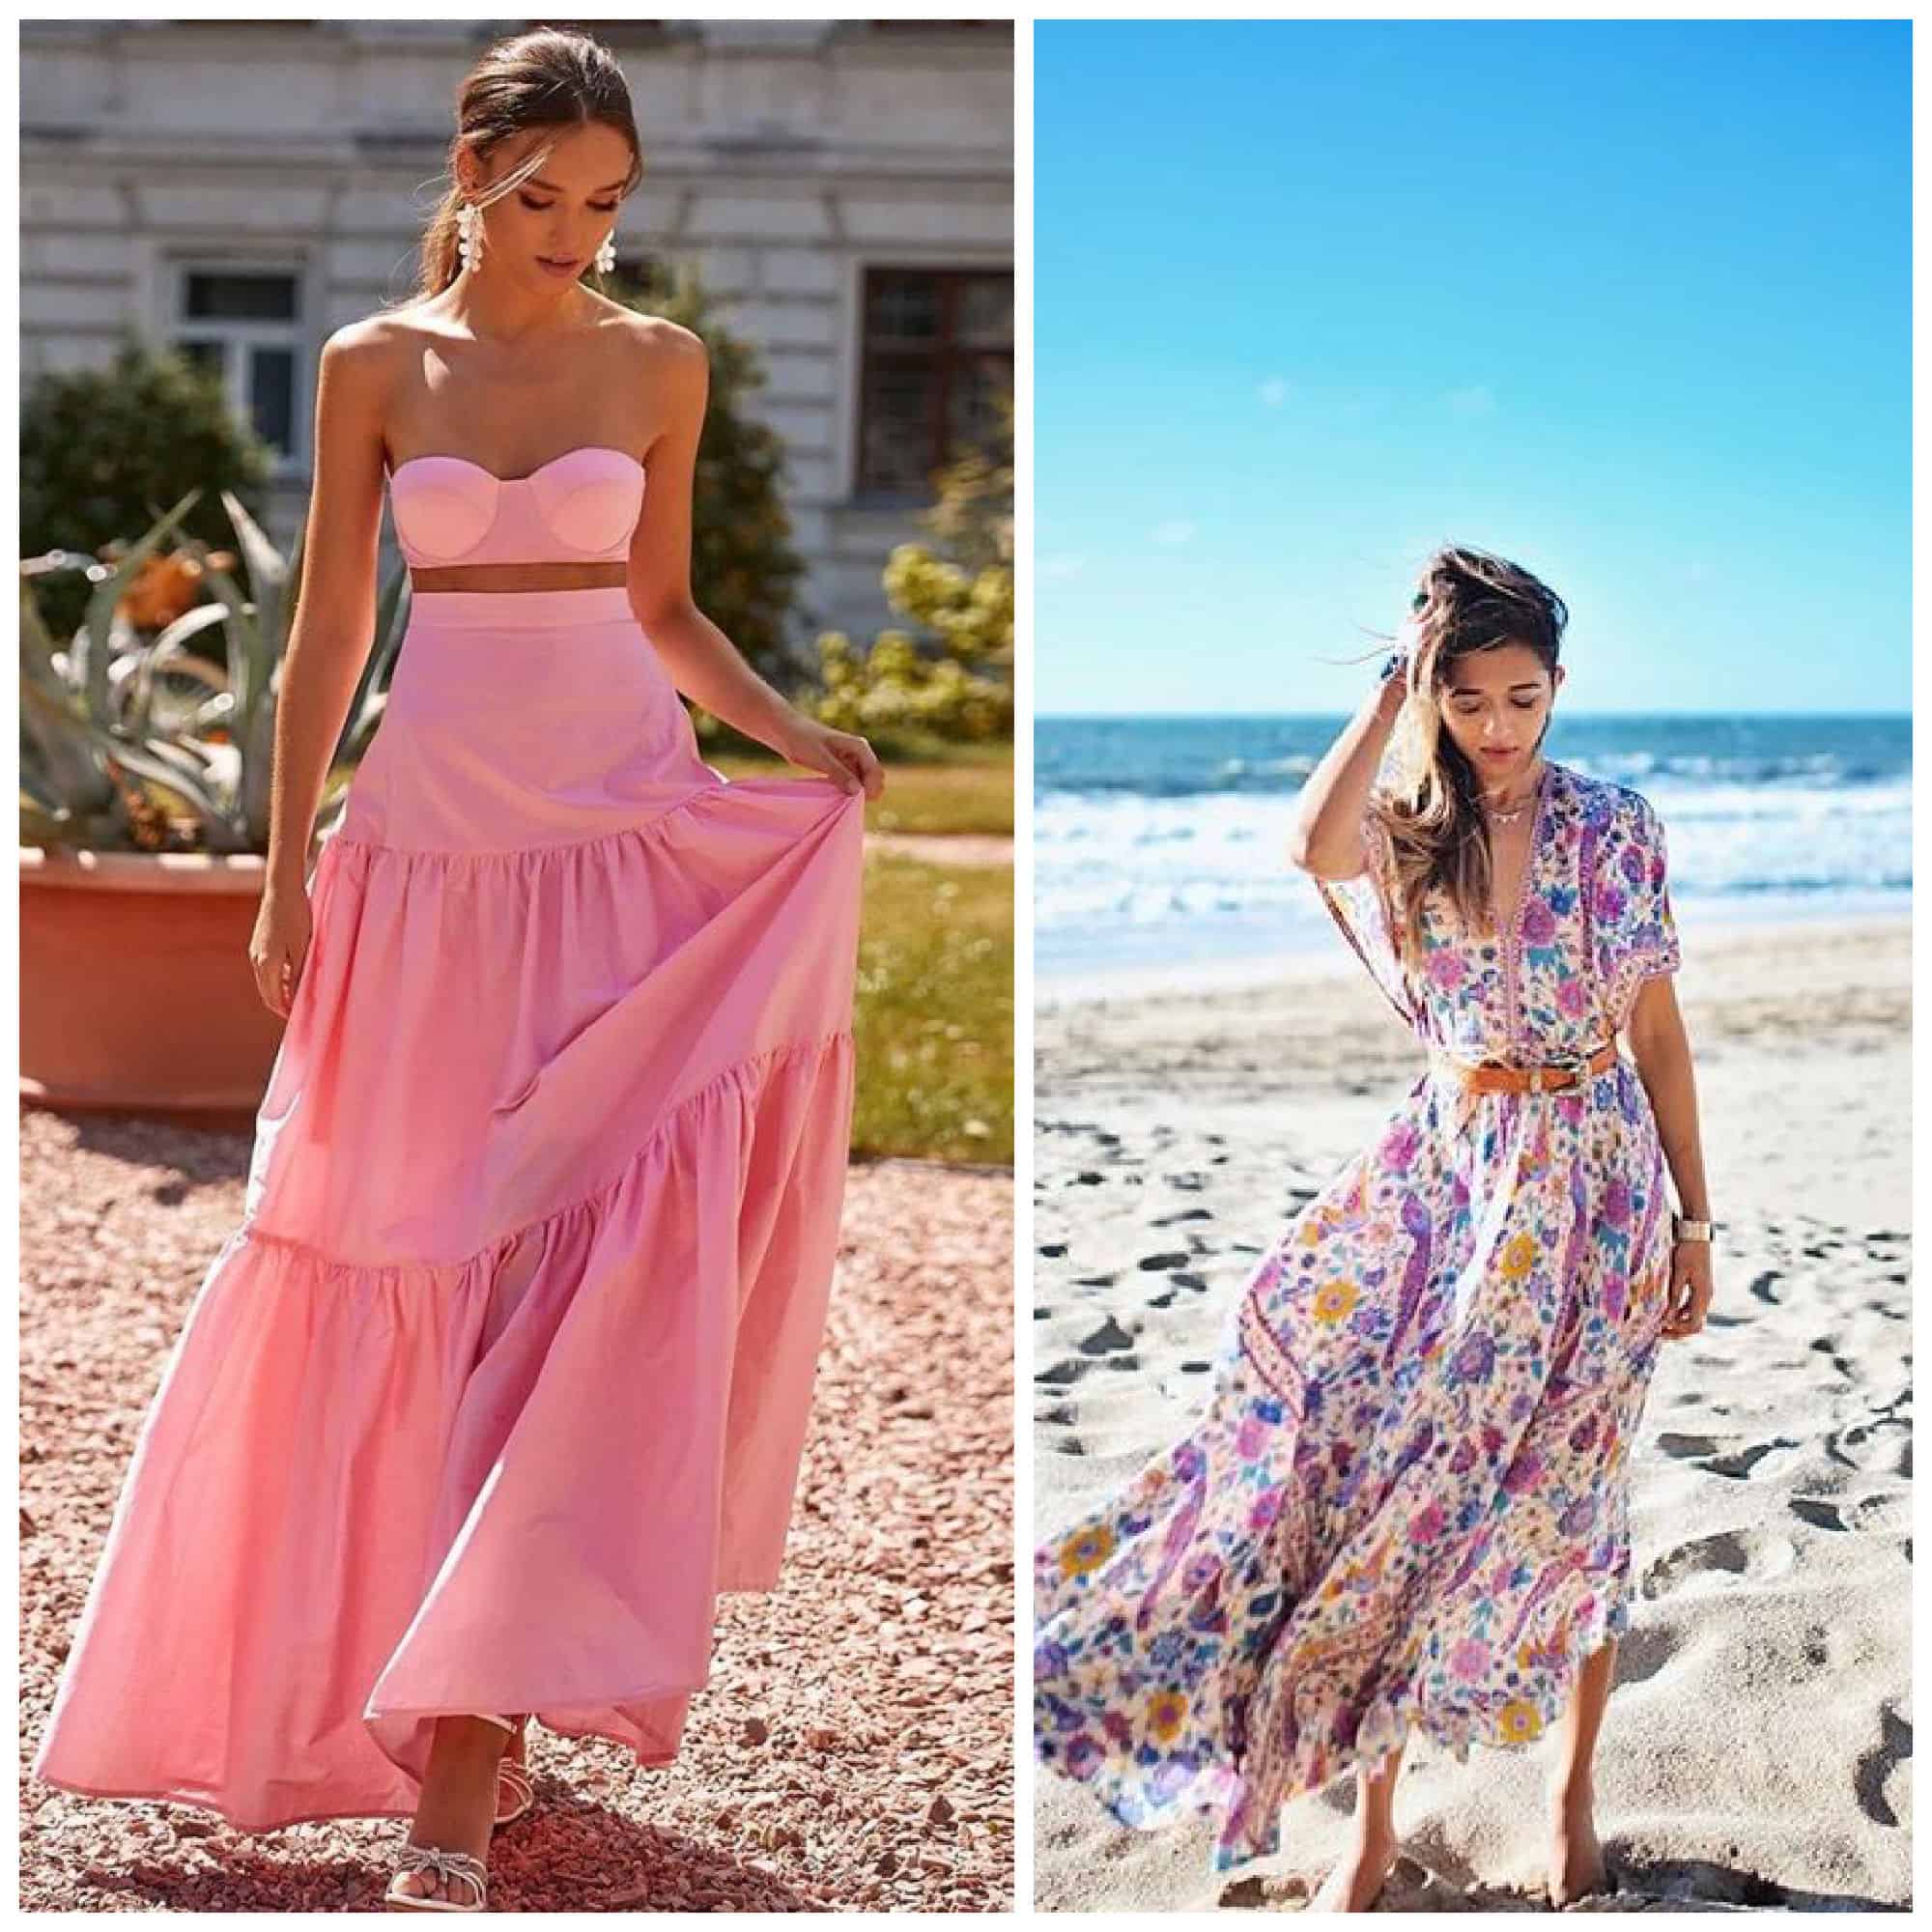 stylish beach outfit ideas to rock this summer 4